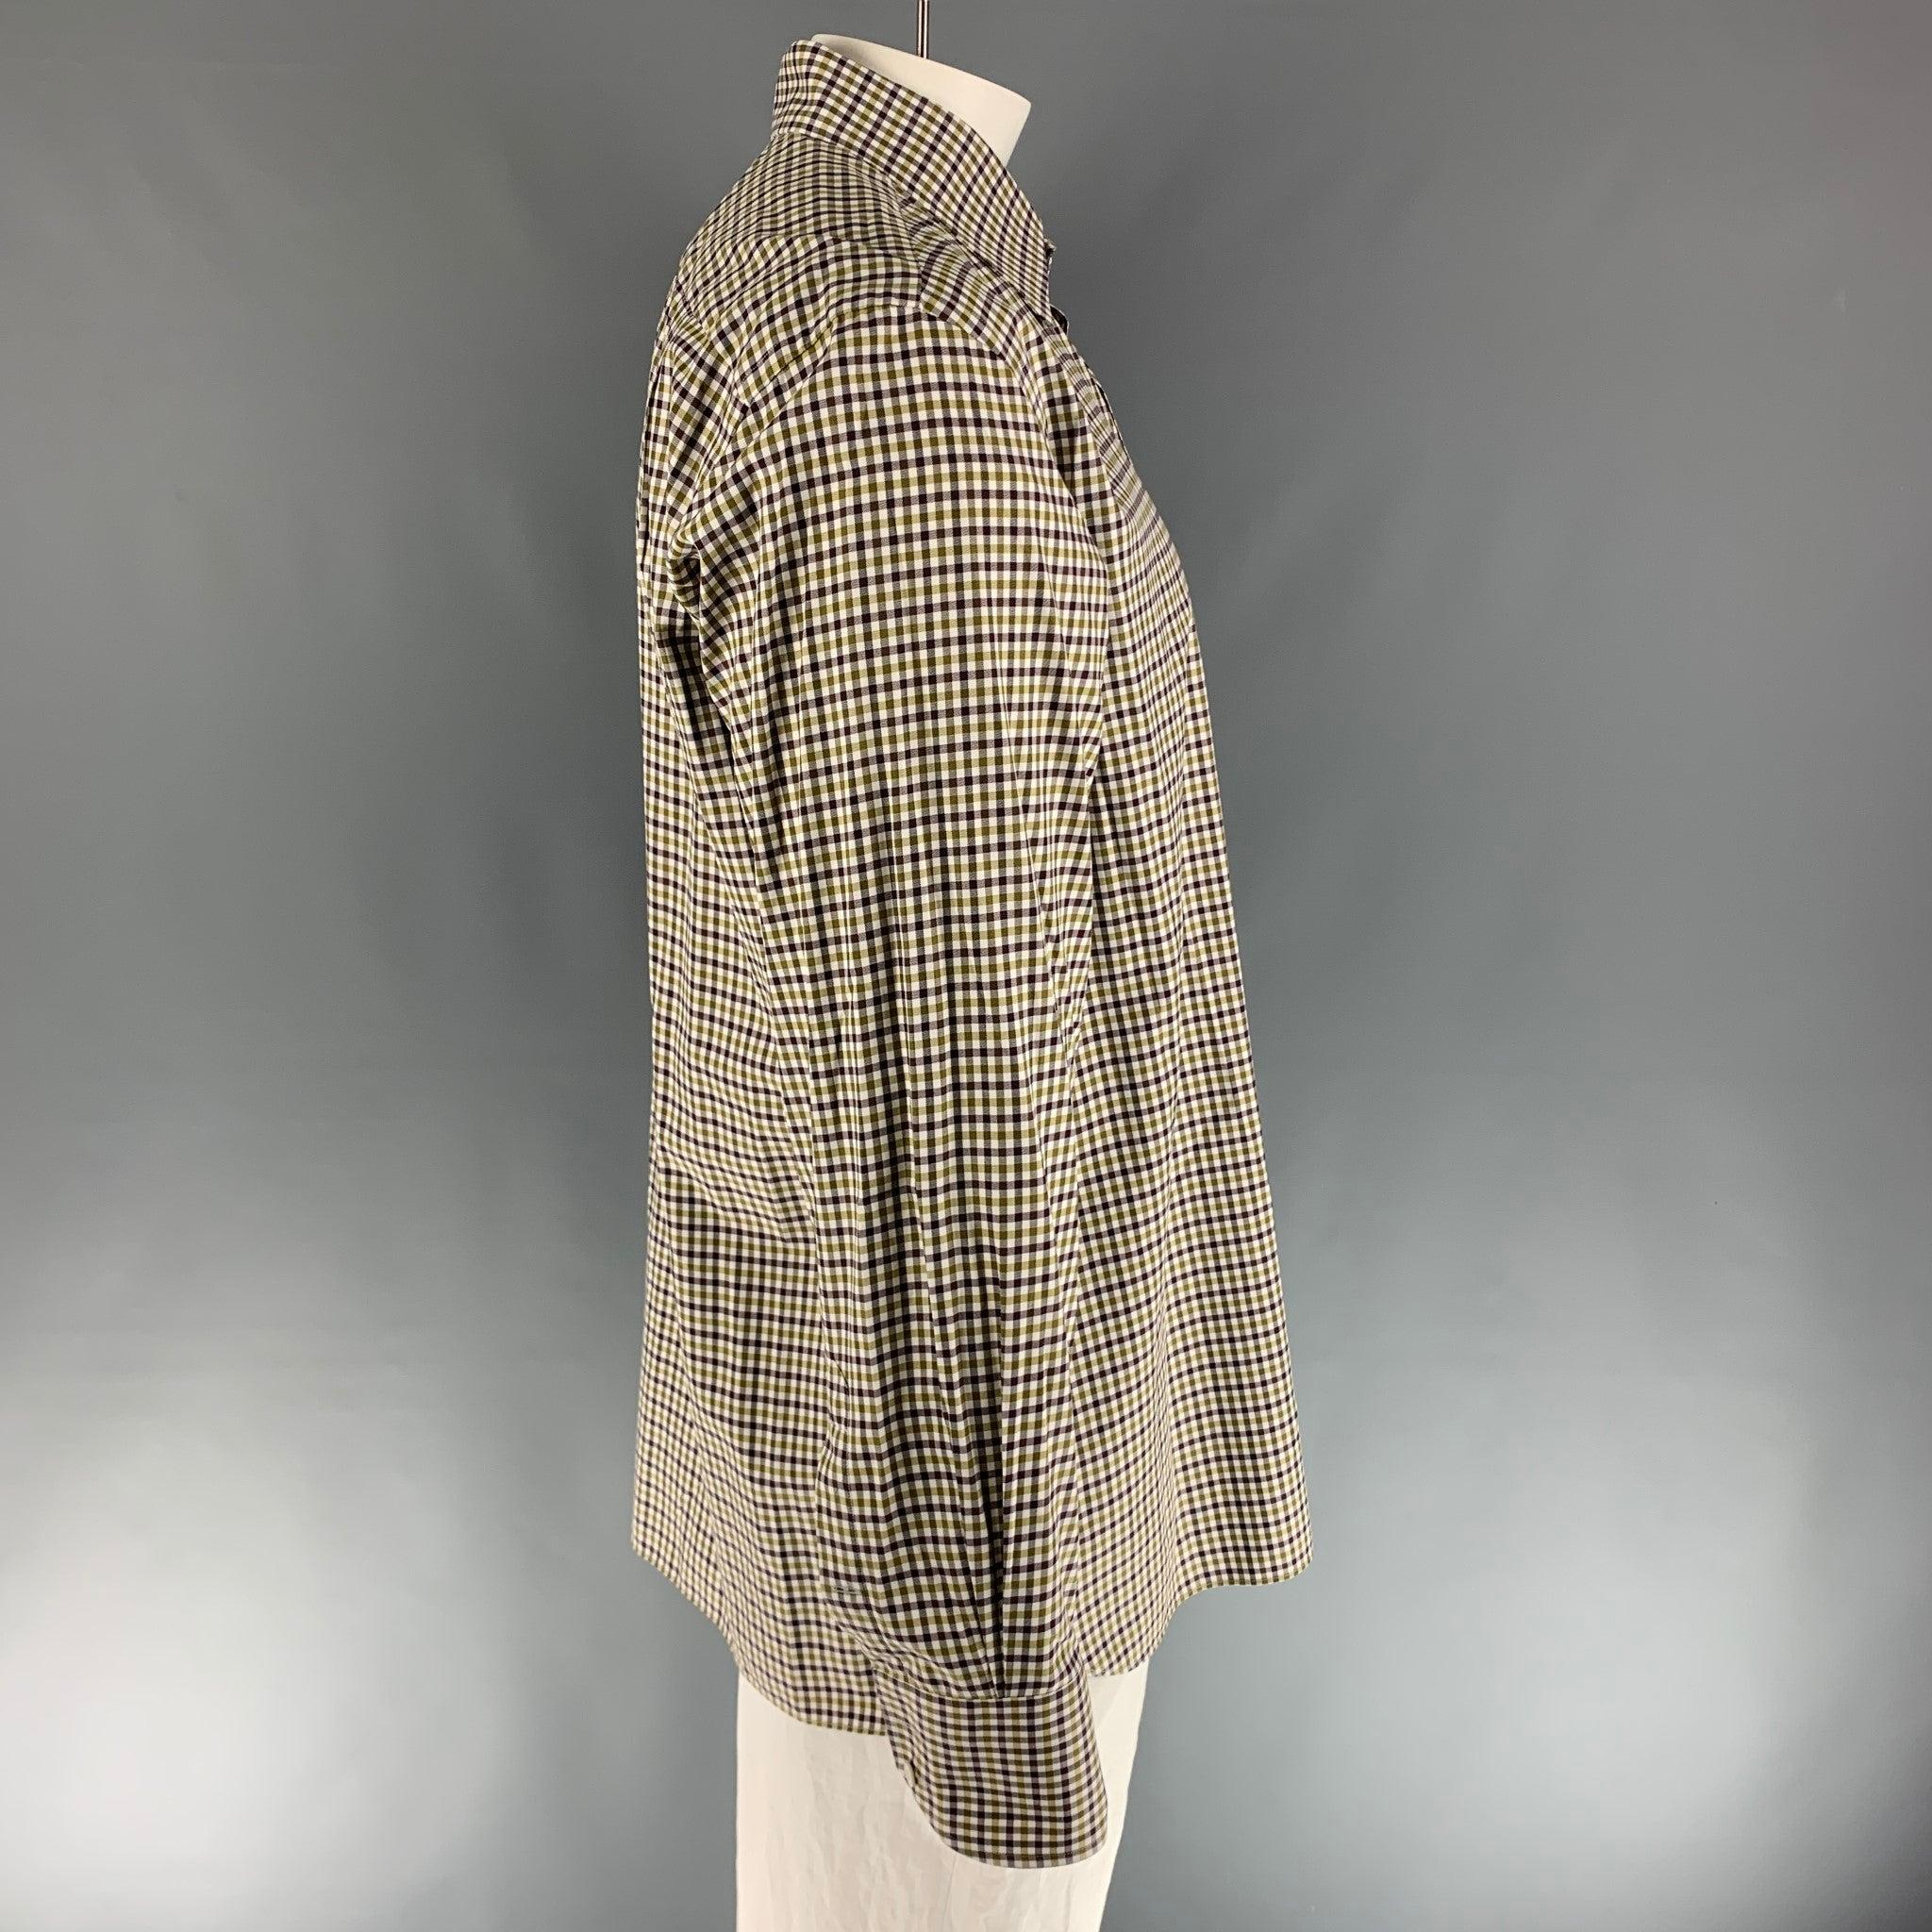 TOM FORD long sleeve button down shirt comes in a green, brown, and white checkered design and a spread collar. 100% cotton.
Very Good Pre-Owned Condition. 

Marked:   44 & 17 1/2
 

Measurements: 
  
Shoulder: 20 inches Chest: 49 inches Sleeve: 27